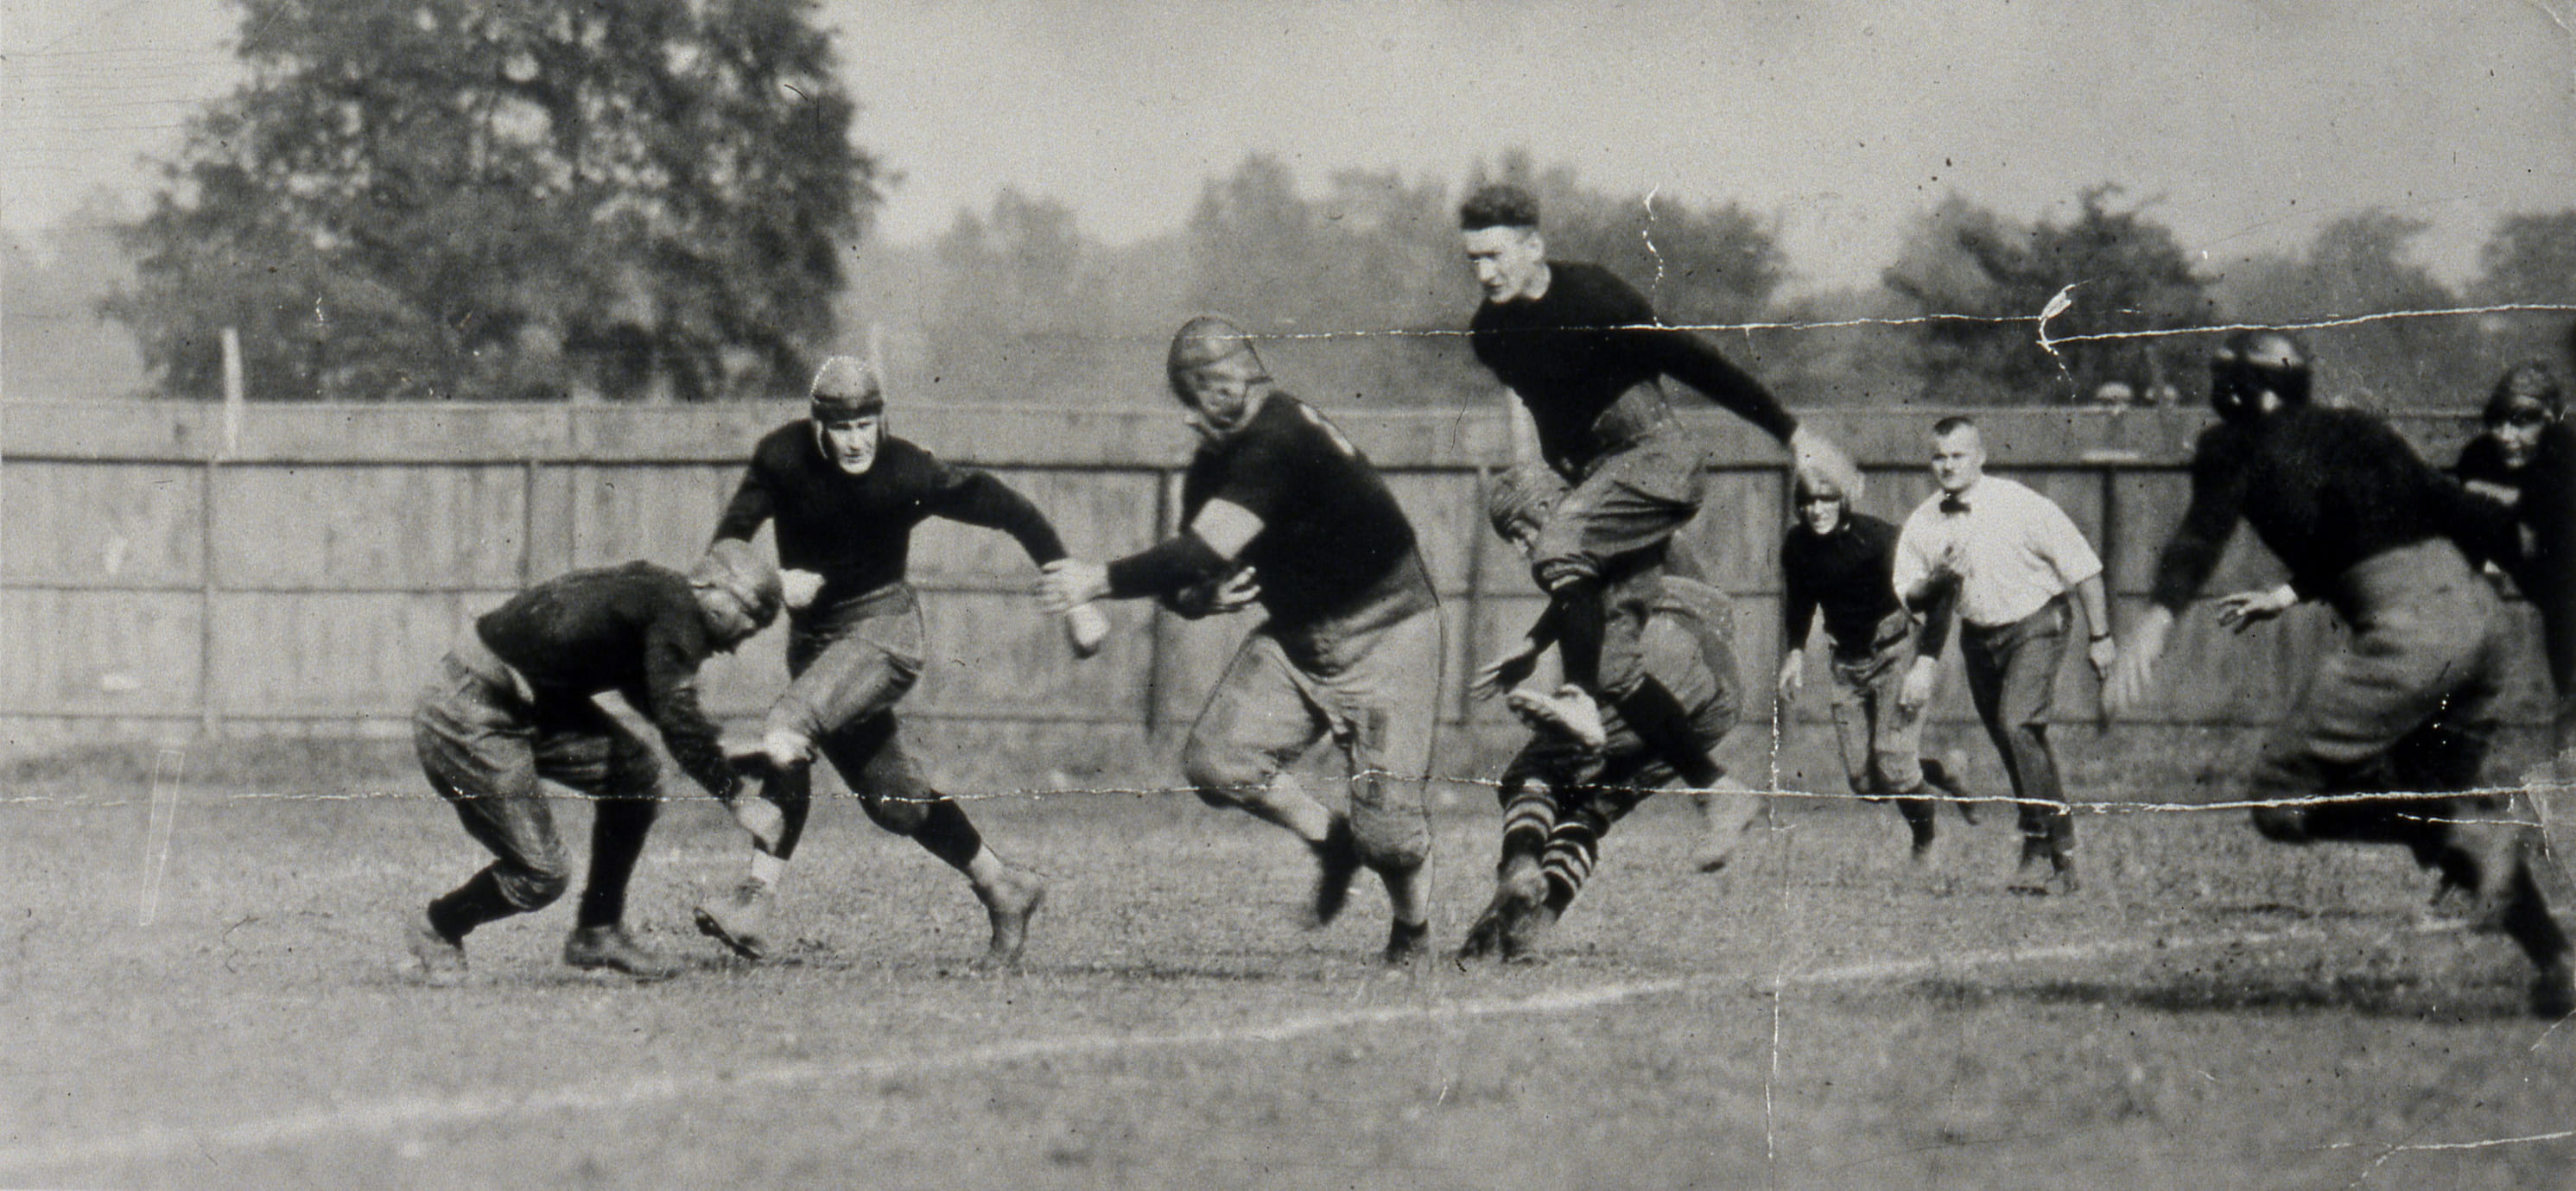 Canton Bulldogs play a game in the 1920s.